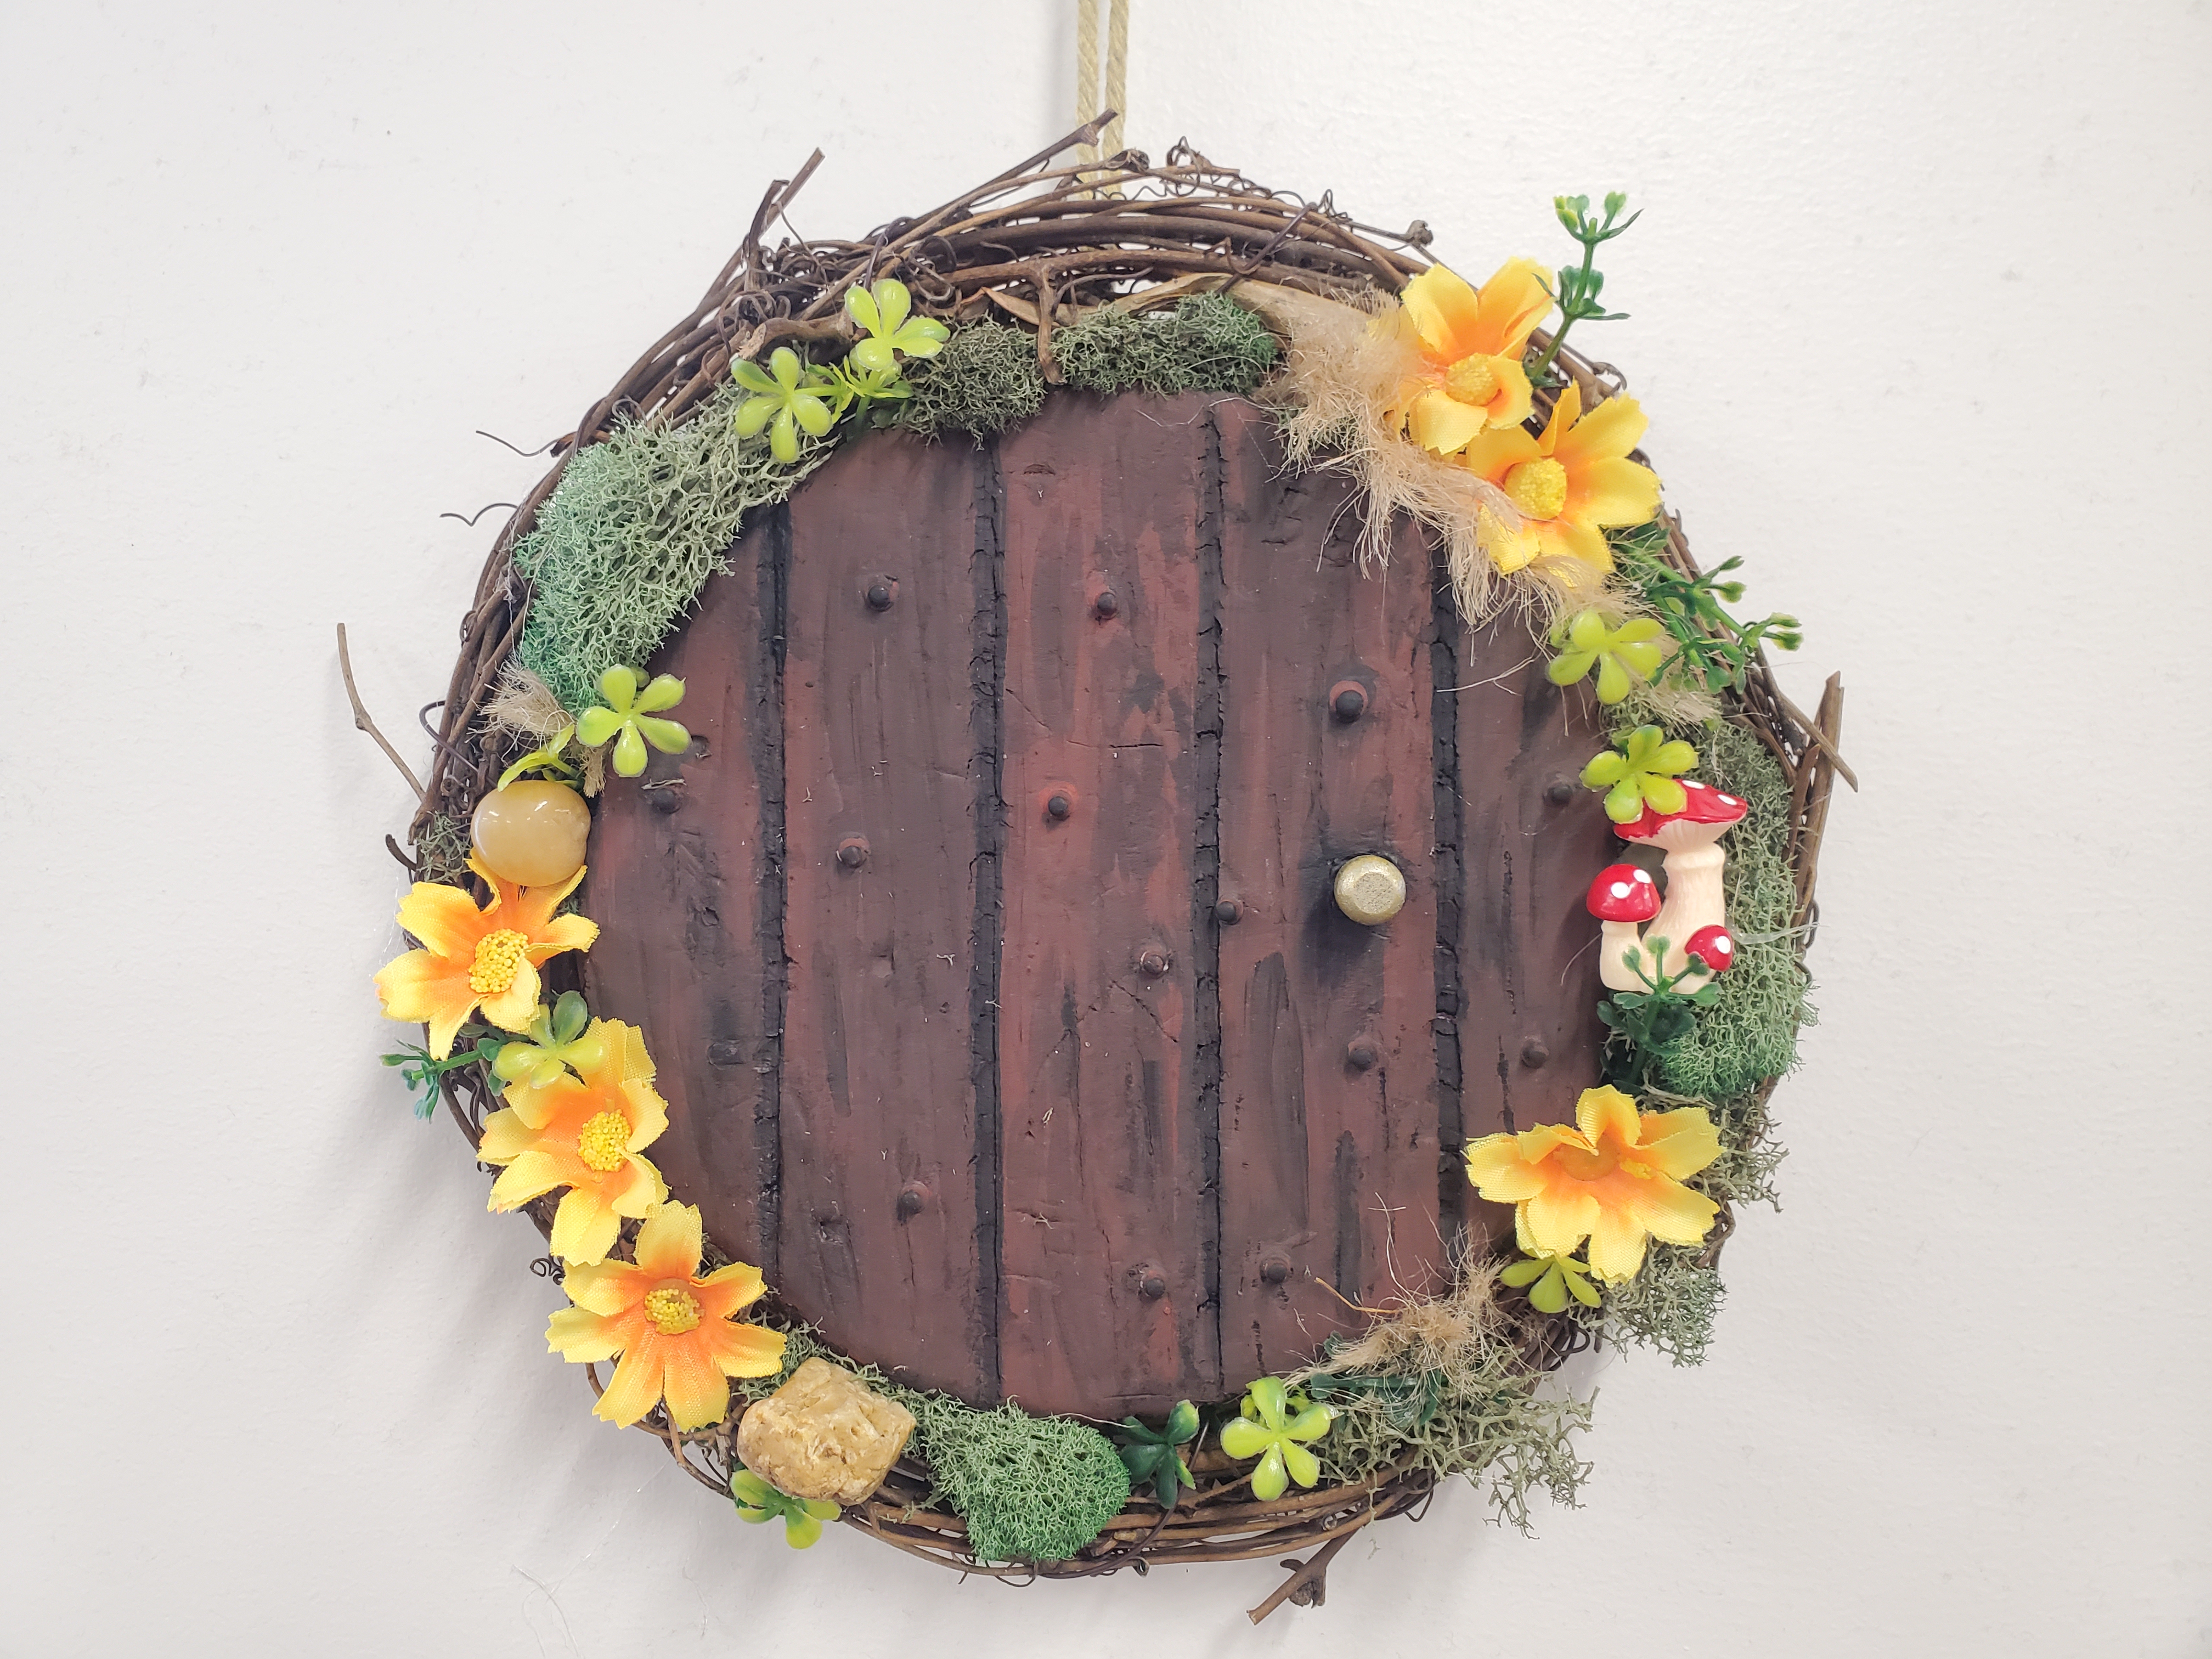 wreath made to look like door with flowers, moss, and rocks around it